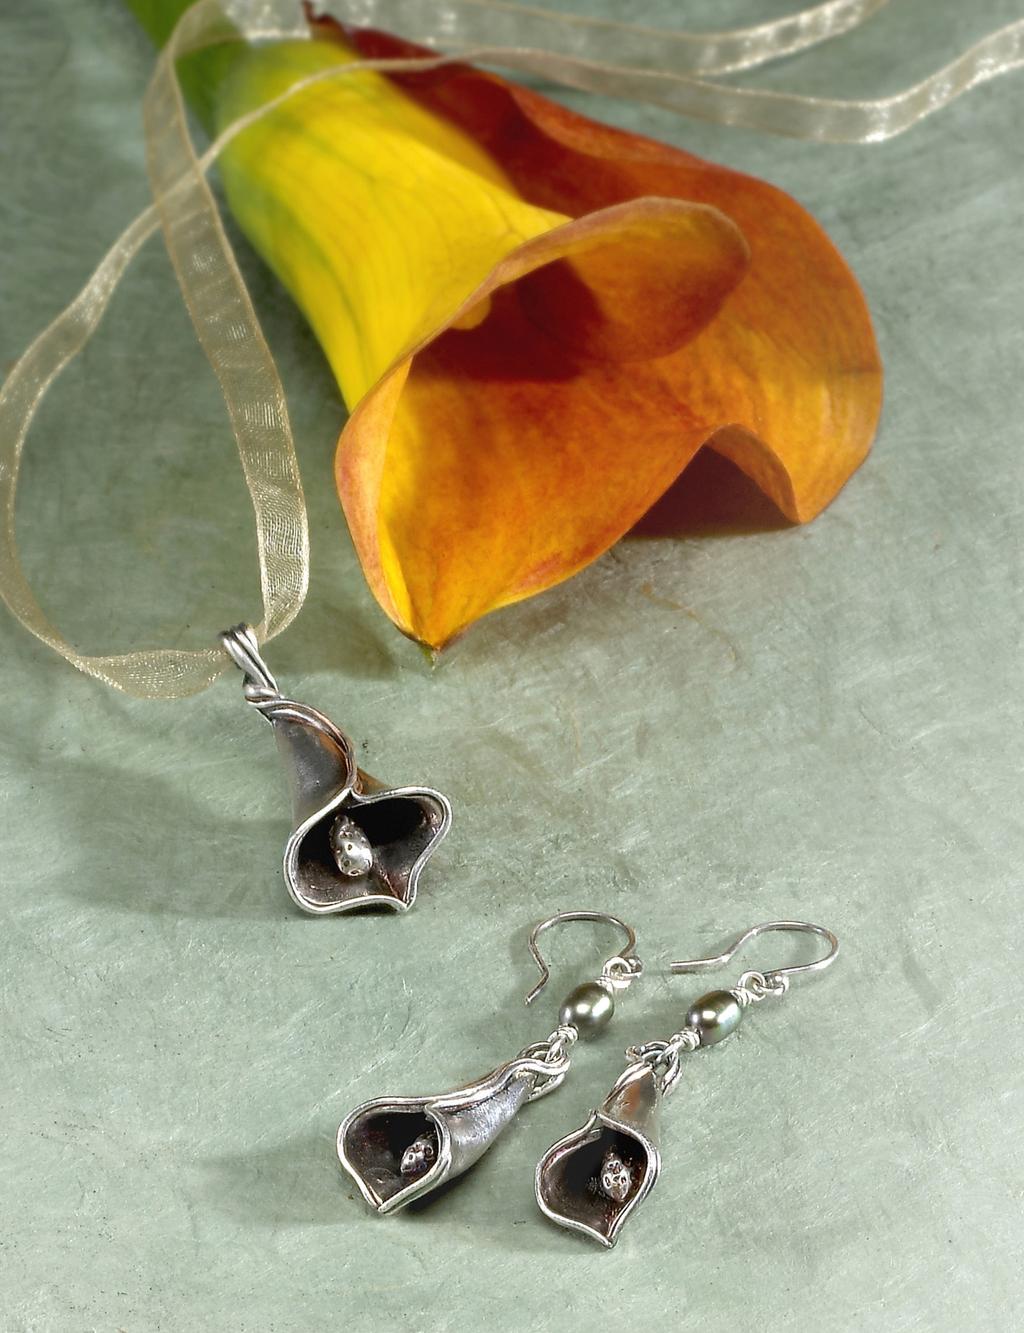 The organic bell shape of the calla lily makes a graceful jewelry component. The pendant is 1½ x ¾ in. (38 x 19mm), and the earrings are 2 x ½ in.